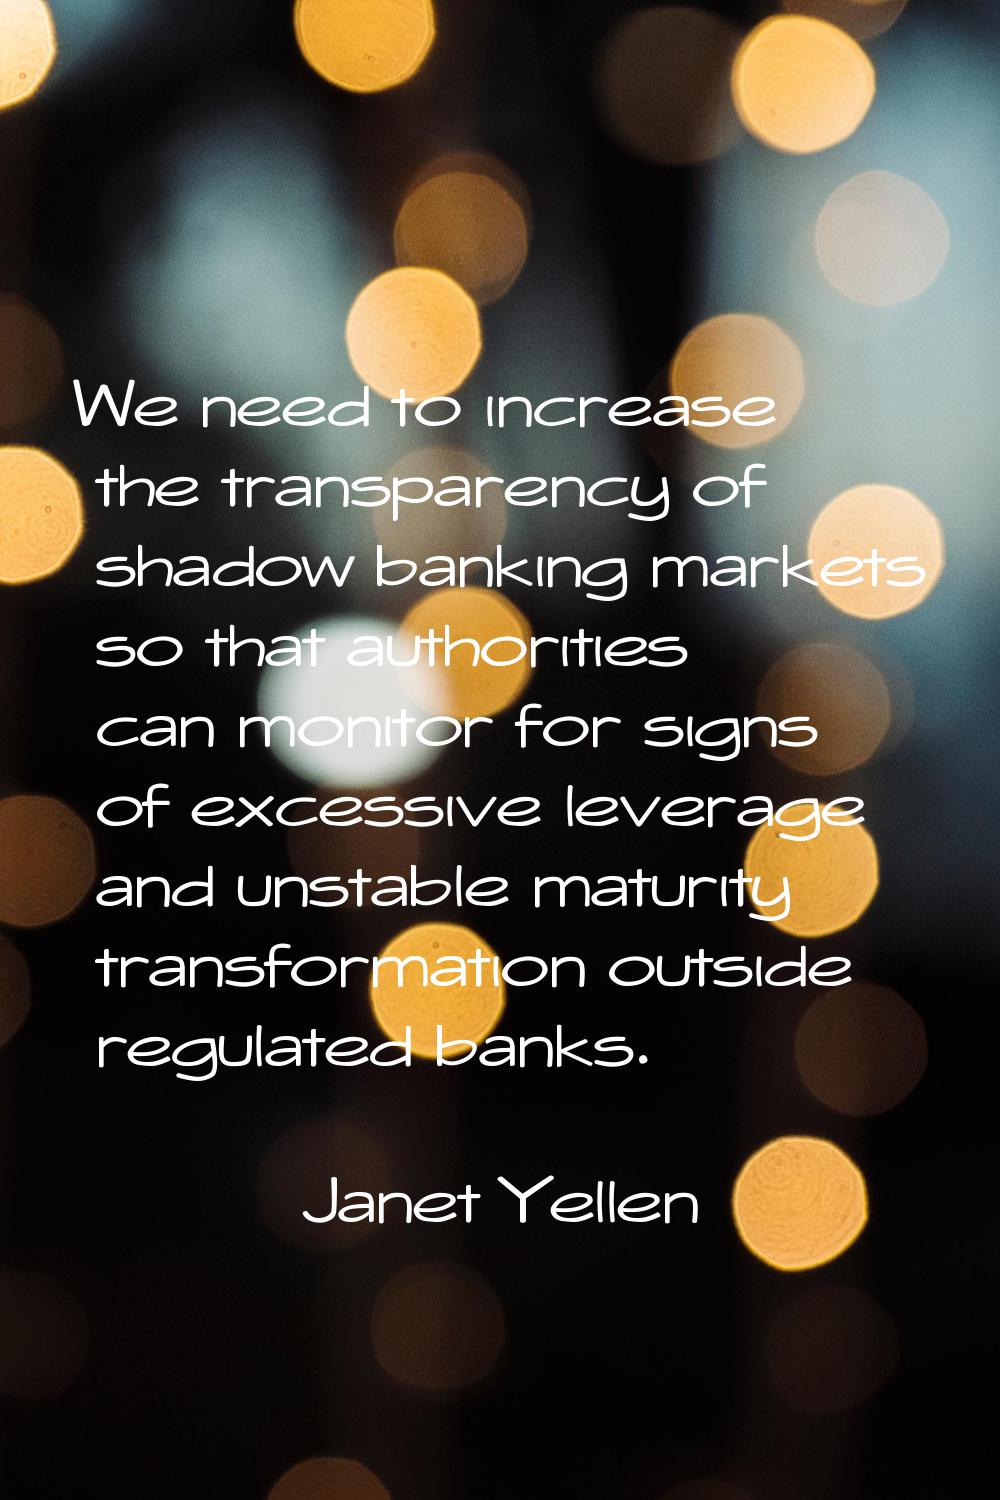 We need to increase the transparency of shadow banking markets so that authorities can monitor for 